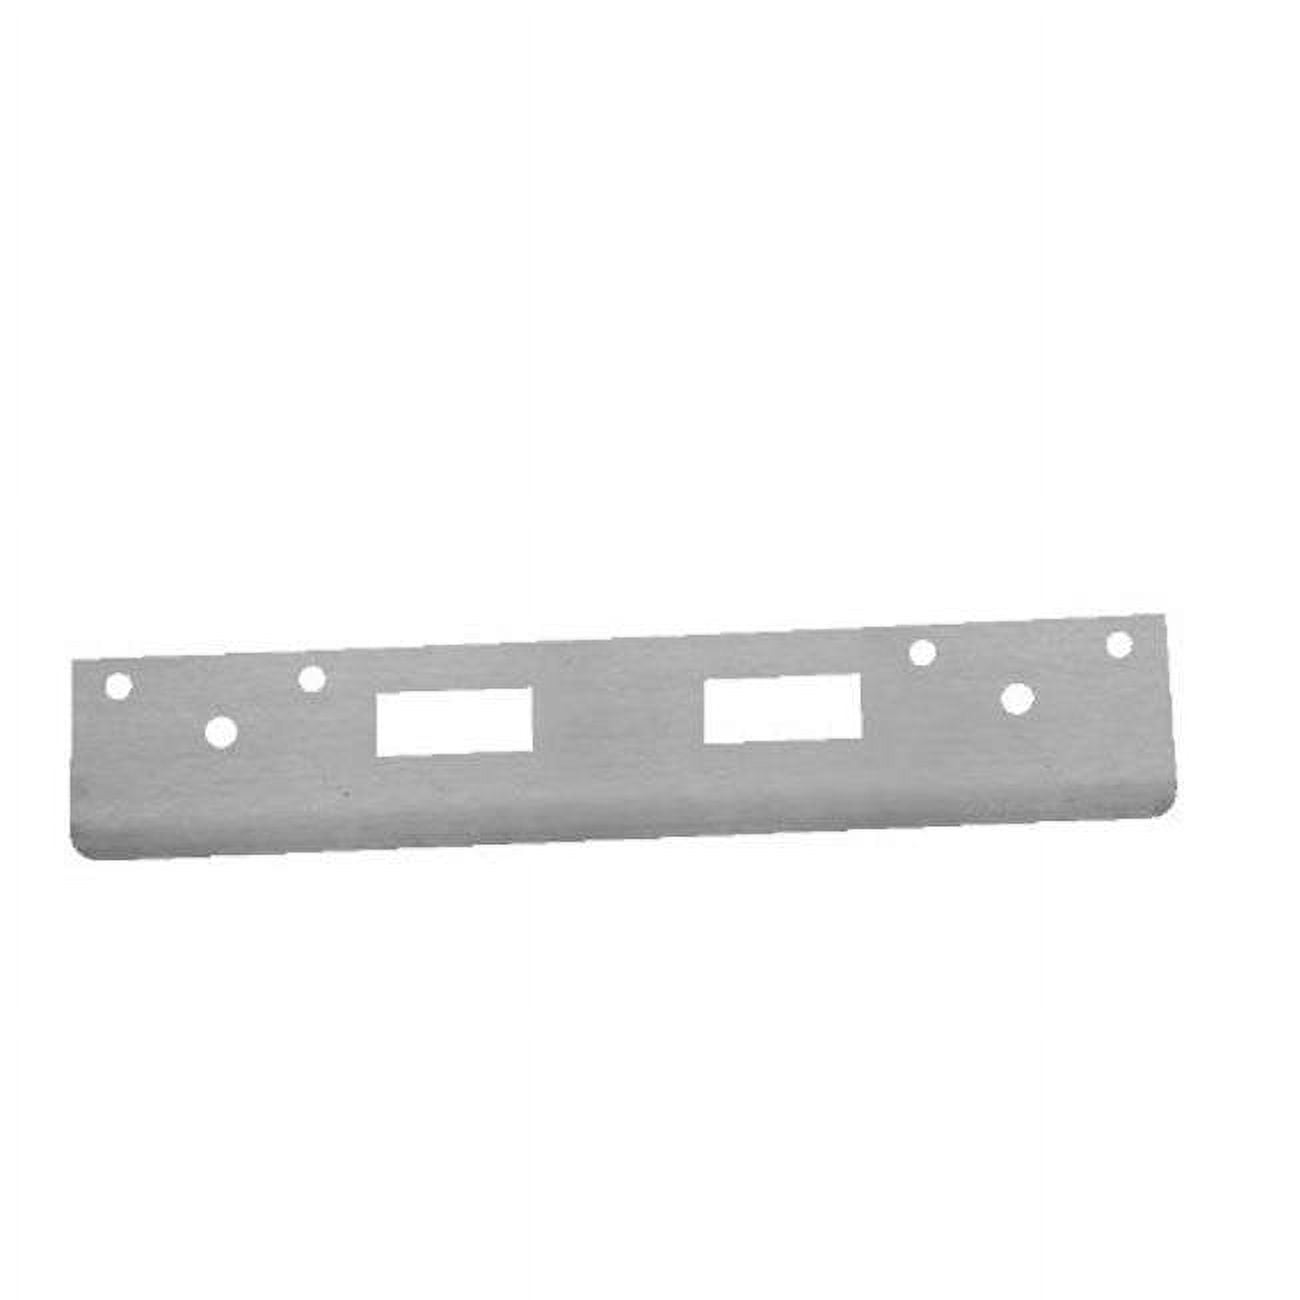 Fl 212w6 -sl 12 In. Full Lip High Security Strike With 6 In. Ctc Latch Holes, Silver Coated